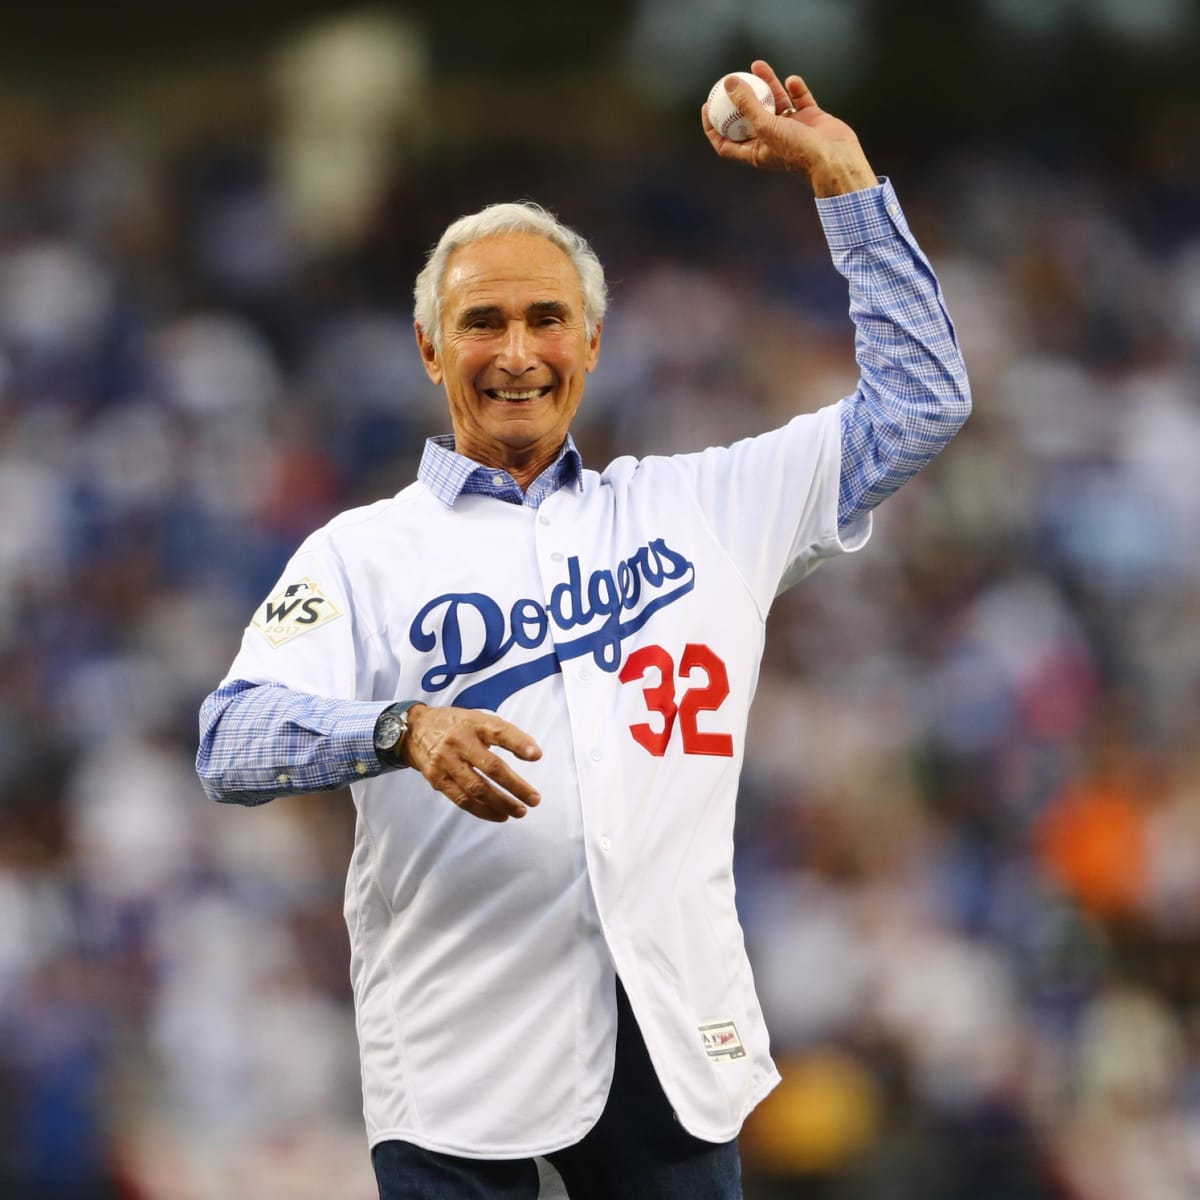 Does anybody think that Sandy Koufax had the best five year peak